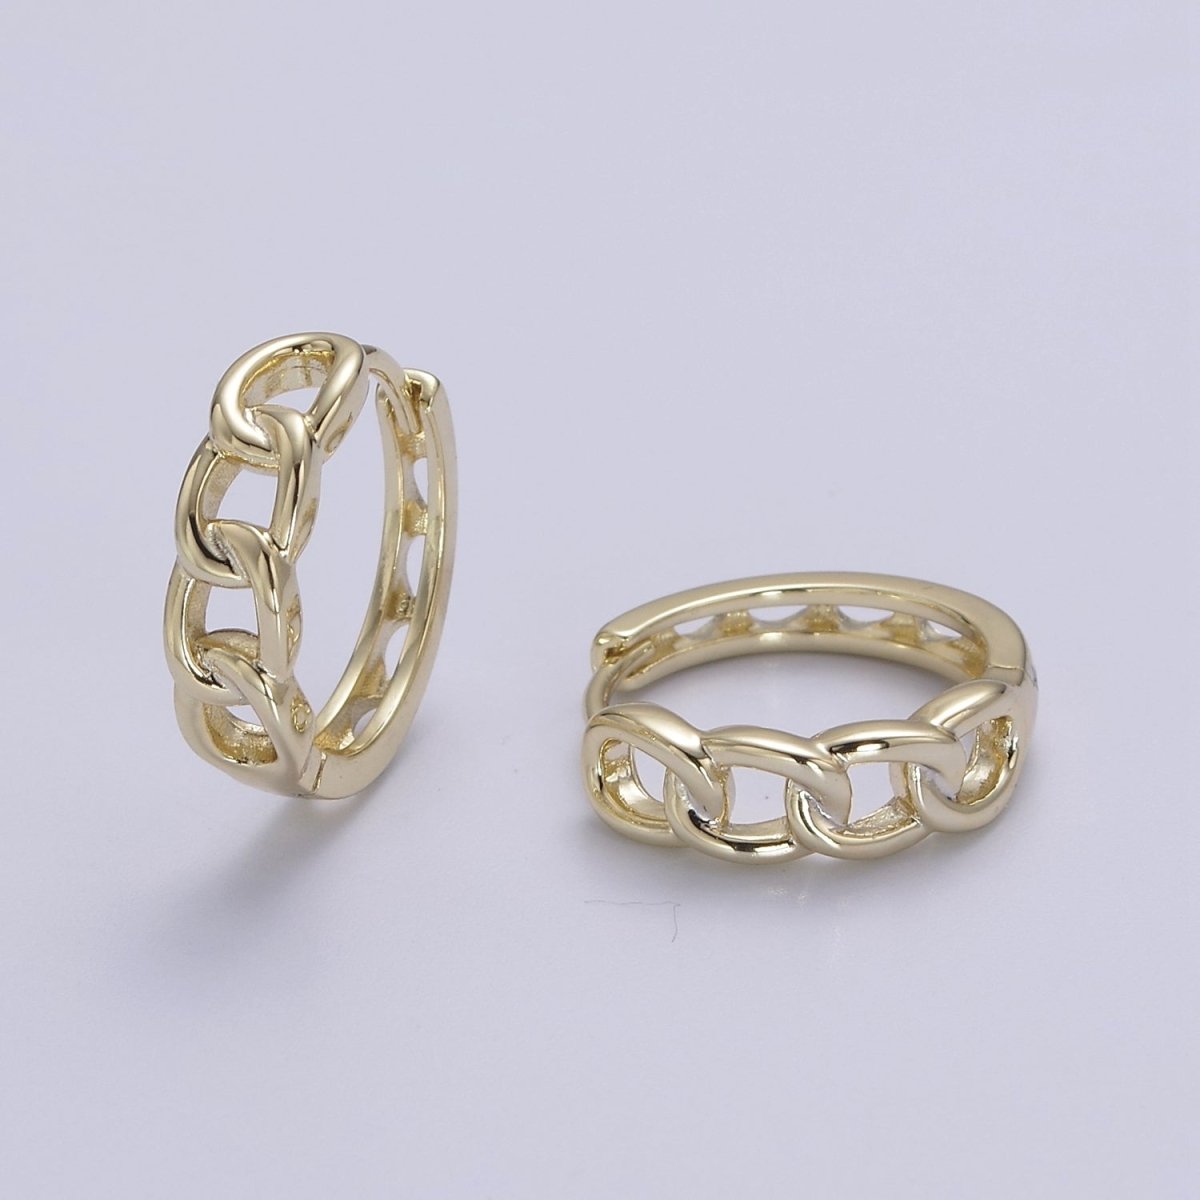 Medium Curb Chain Link Hoop Earring in 14k Gold Filled Jewelry Everyday Earring V-151 - DLUXCA